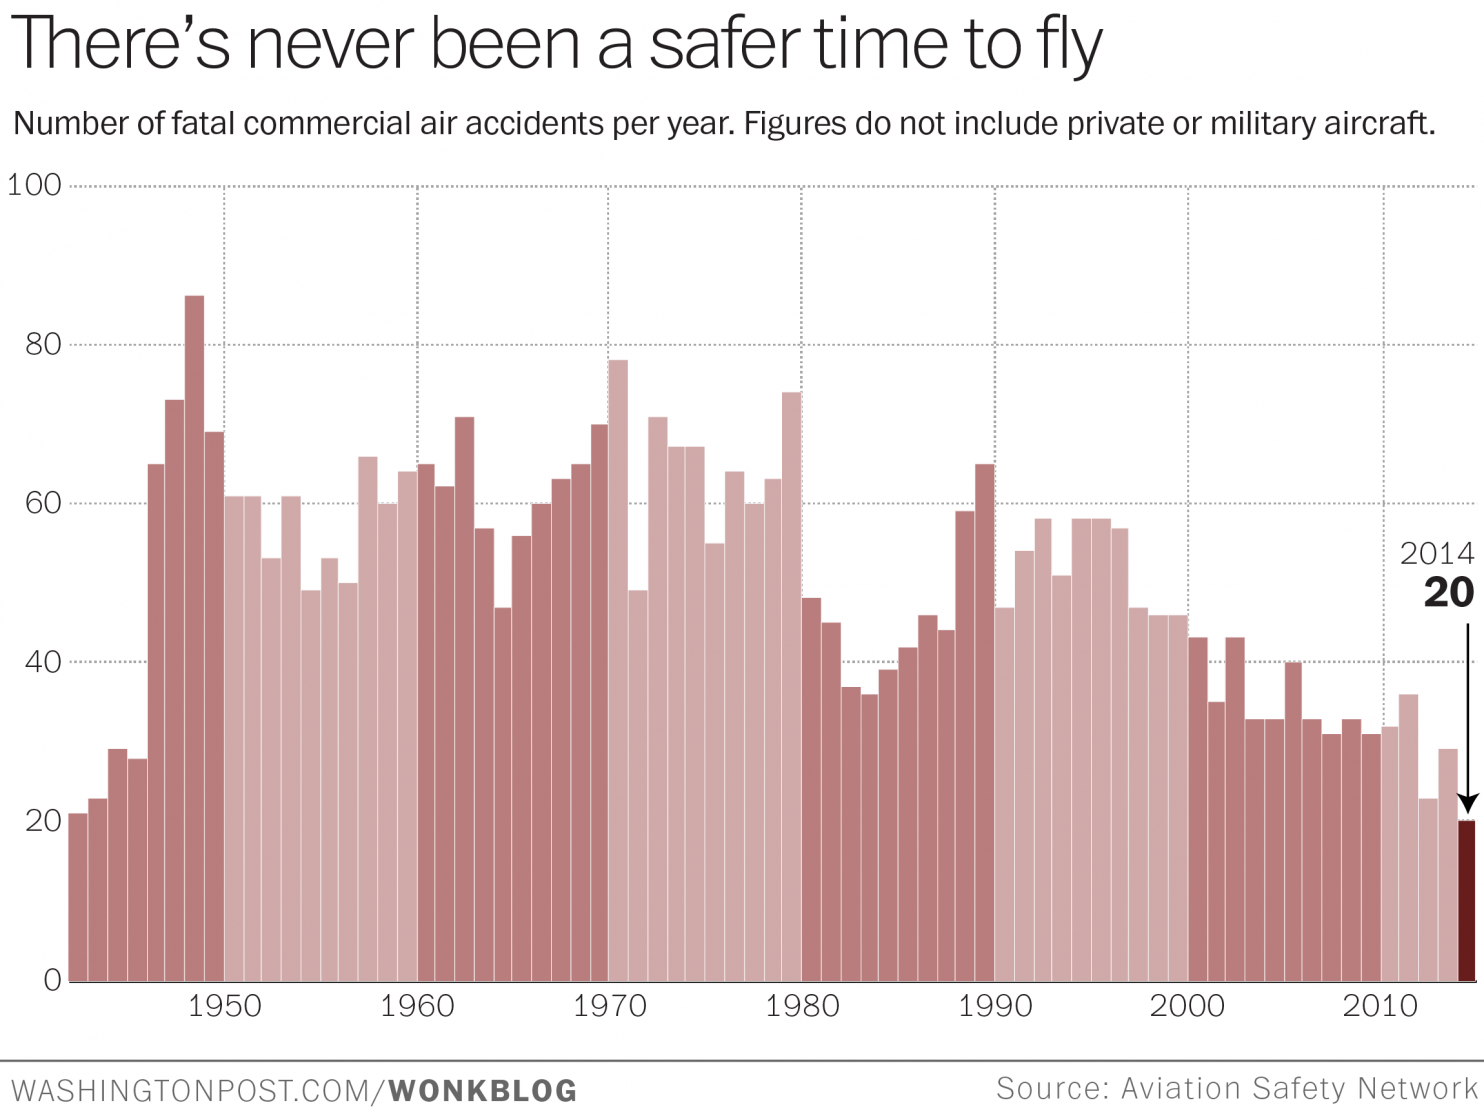 Surprisingly, 2014 was the safest year for air travel yet